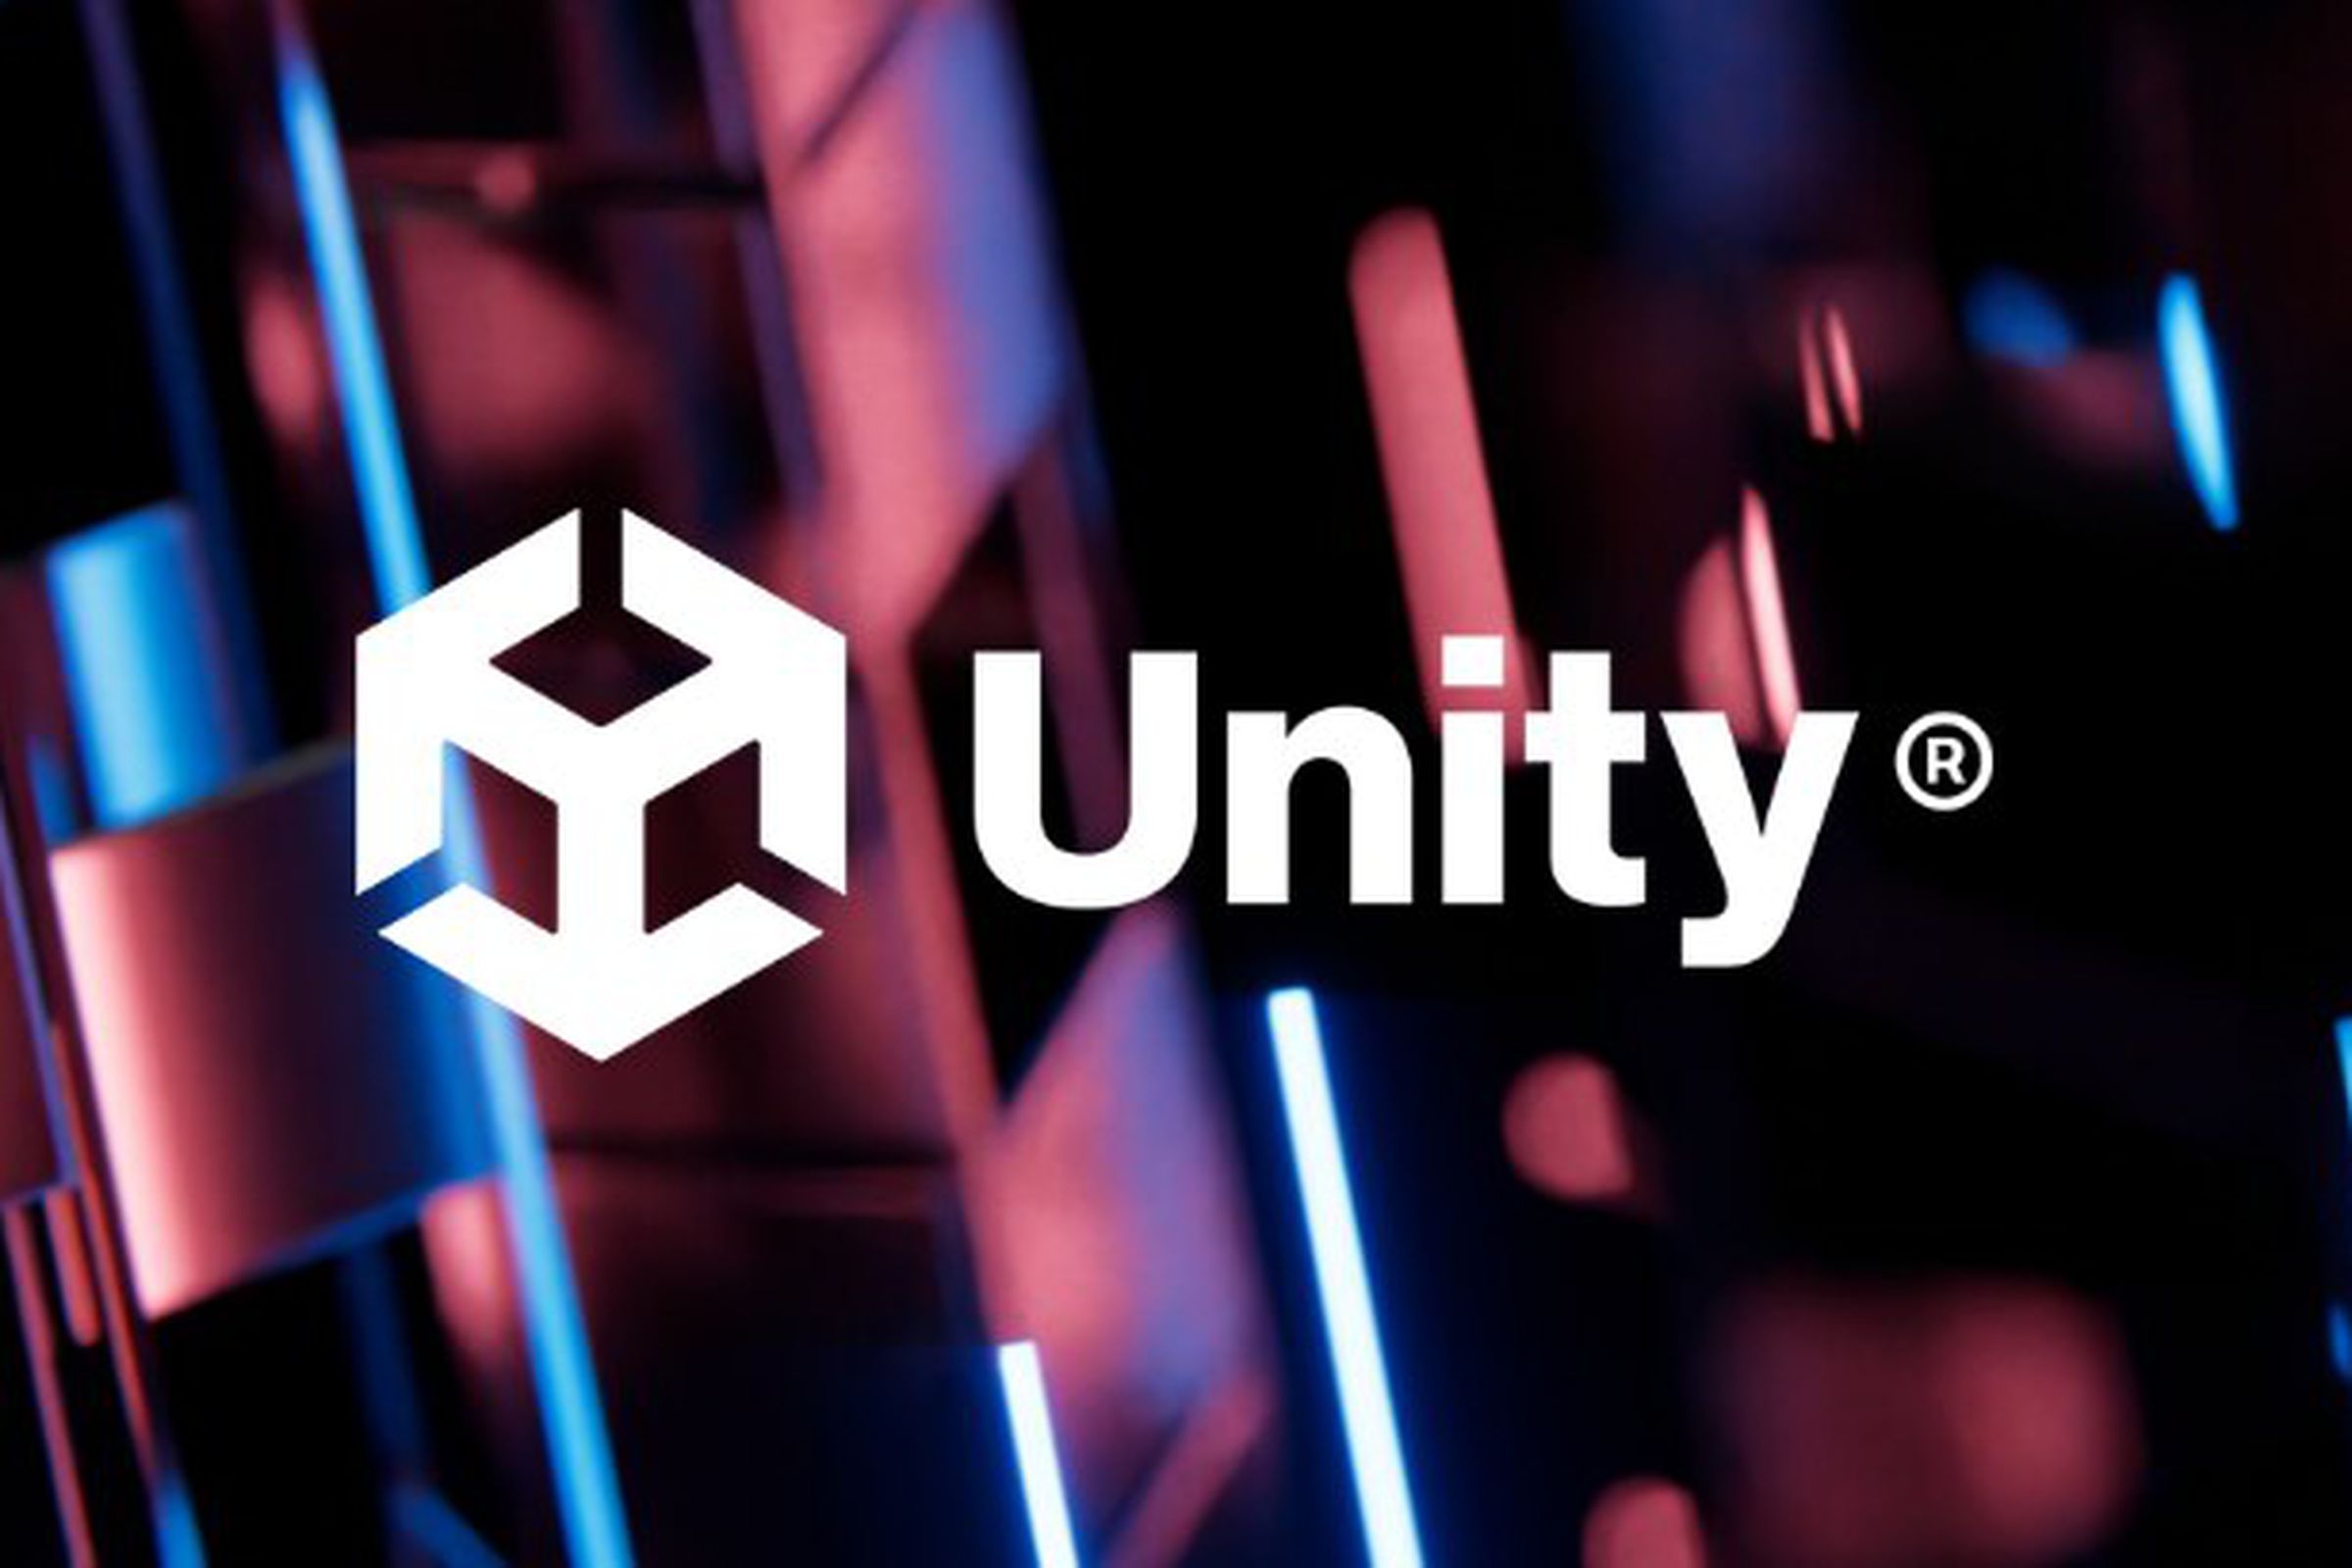 Image from Unity’s website featuring the company’s logo against a colorful background.